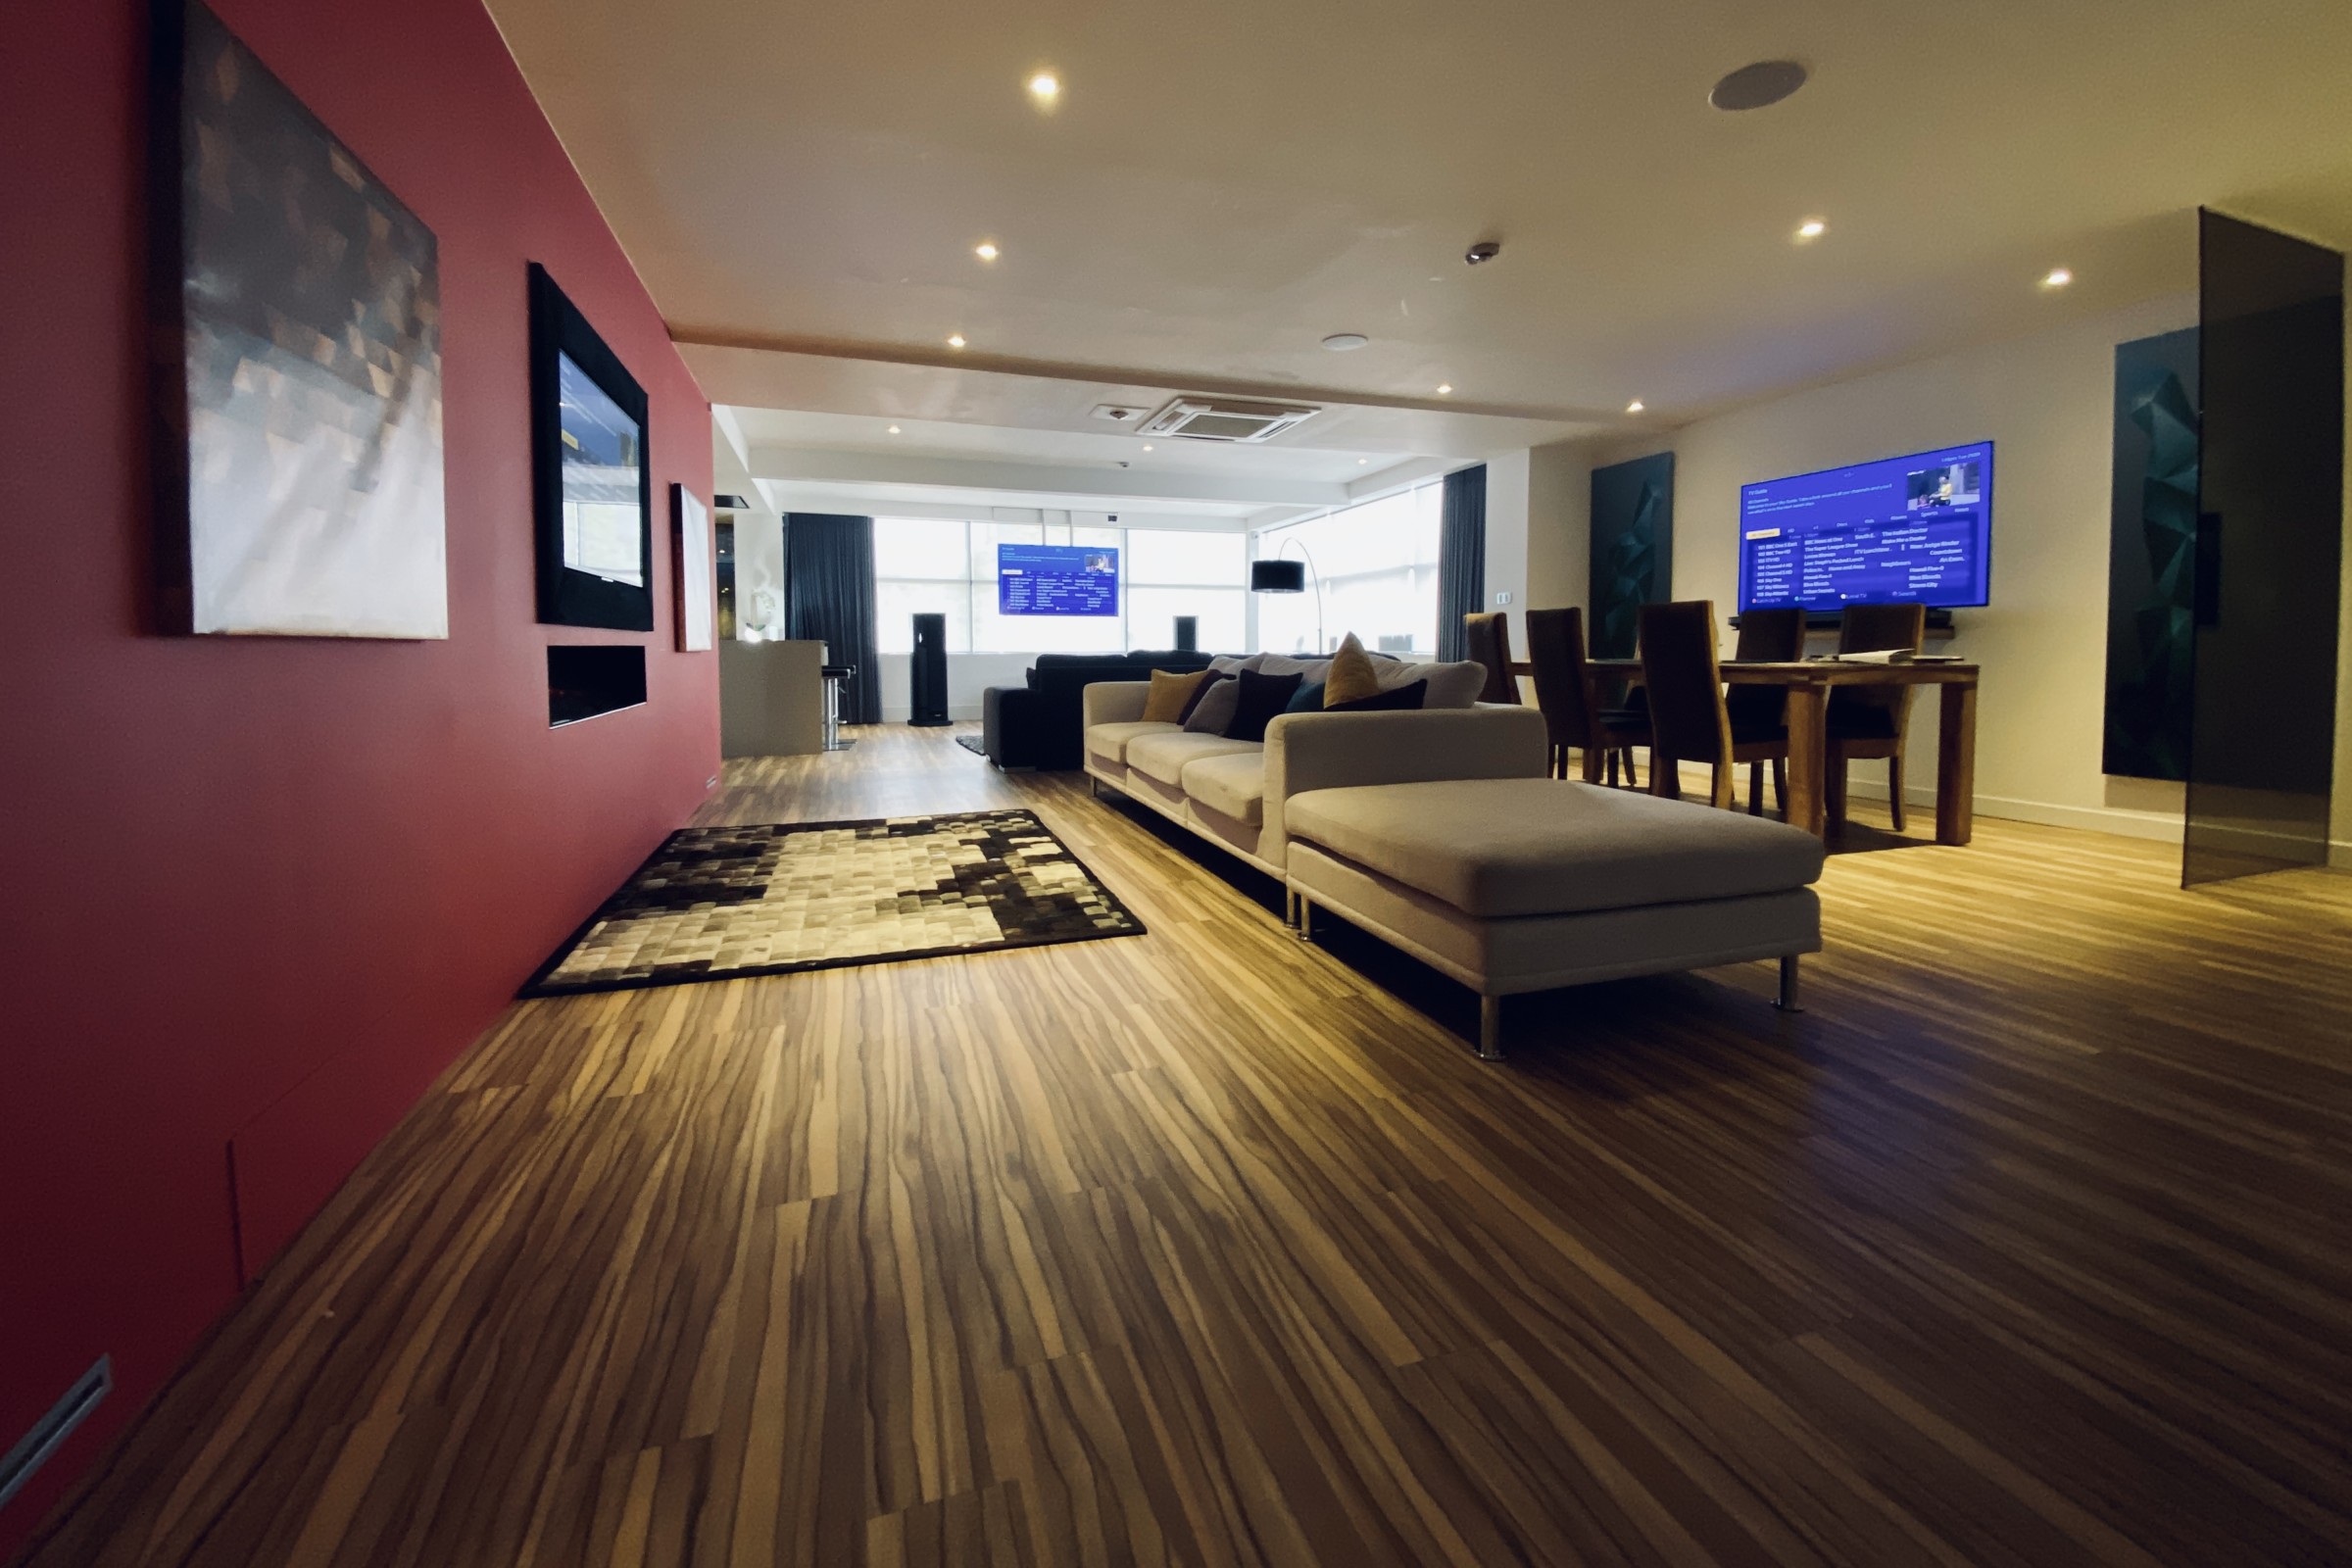 Smart home lounge area with motorised drop-down TV, floor-standing speakers and furniture